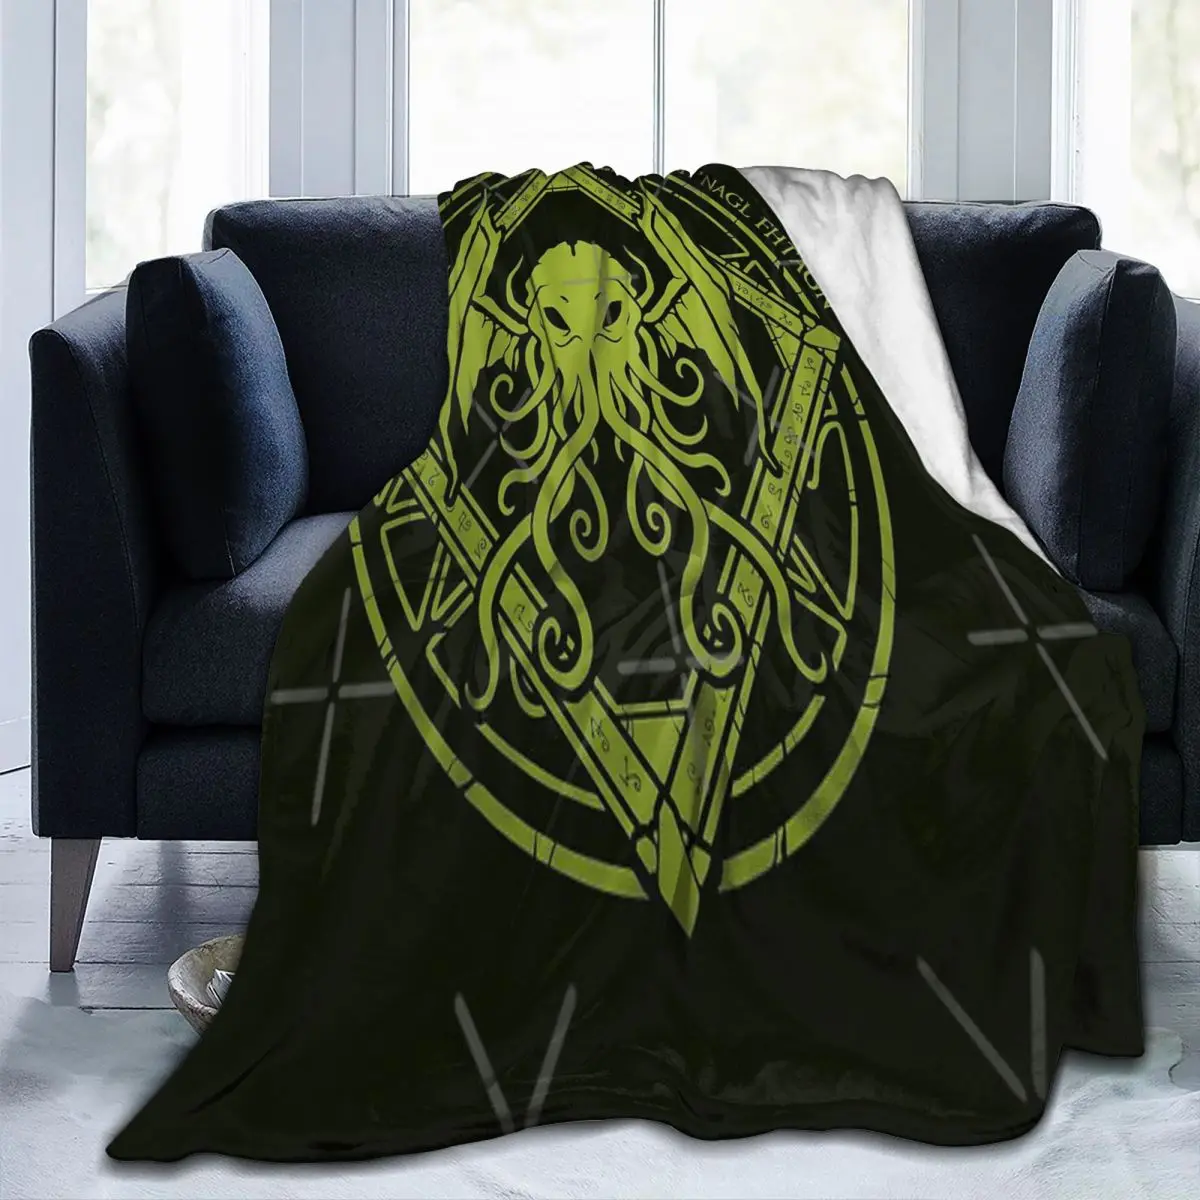 Cthulhu - Lovecraft - Chant Design Throw Blanket Cute WarmSuitable For Sofa Multi Style